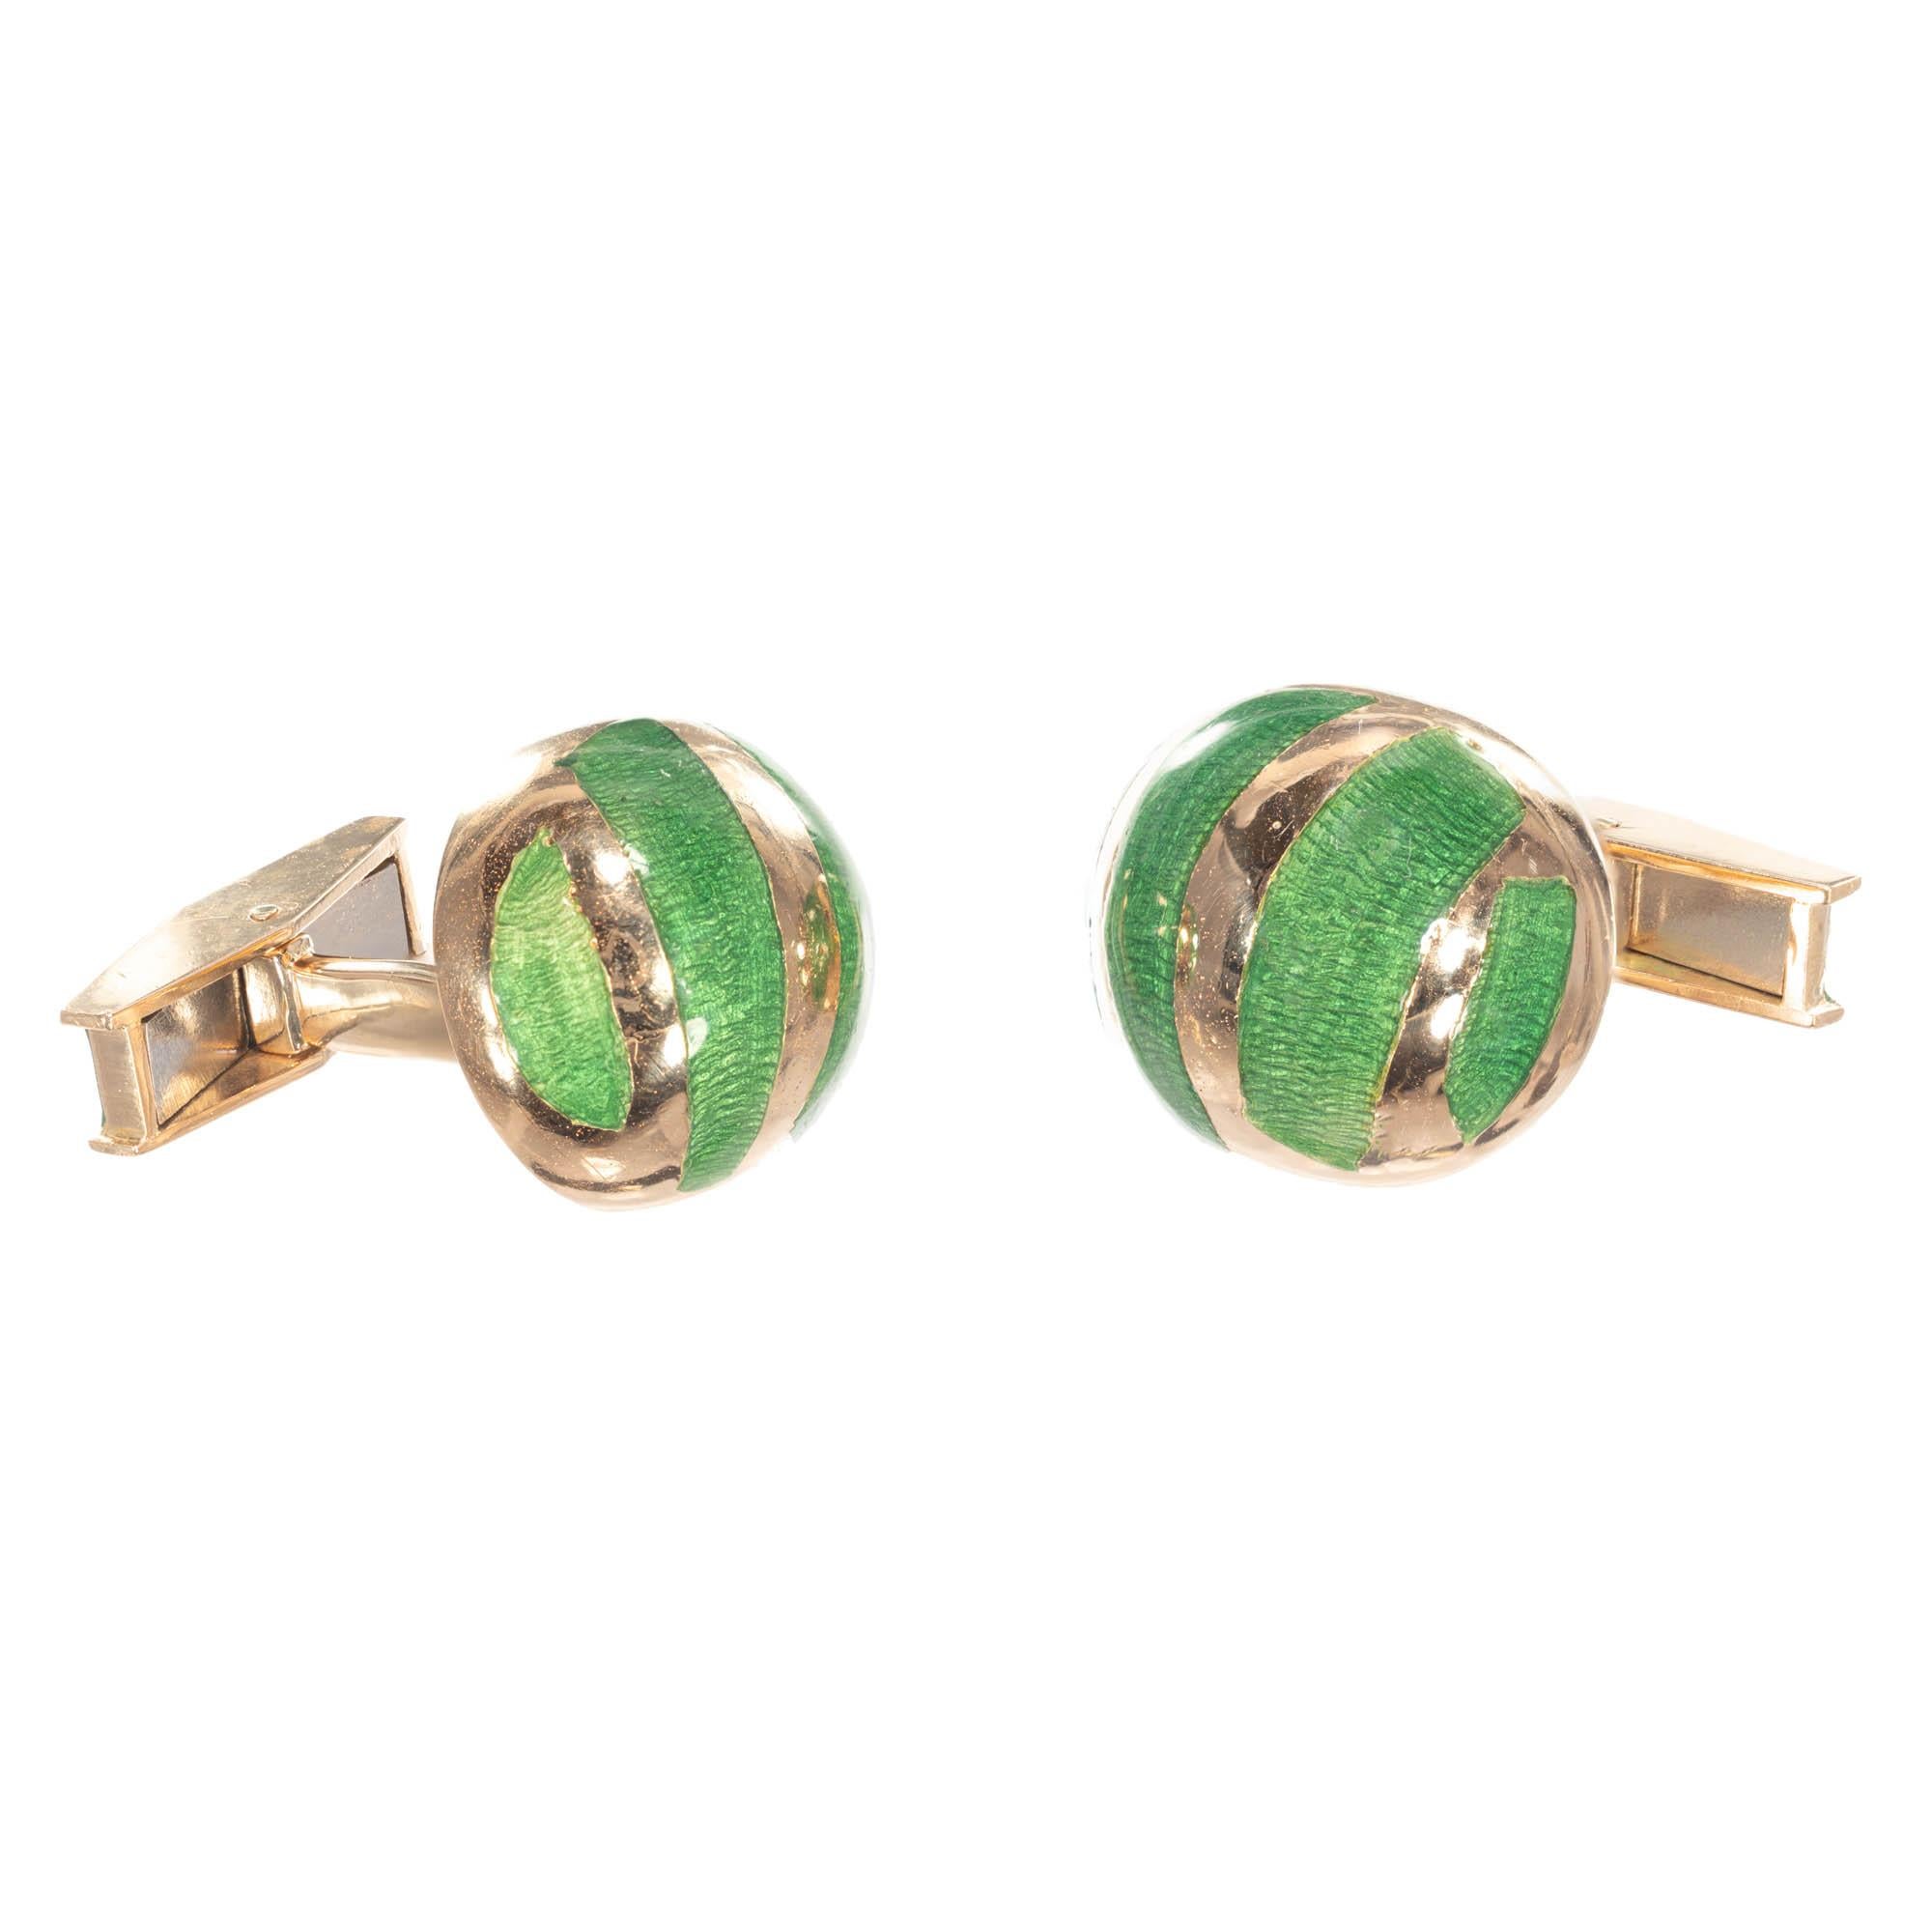 Green Enamel Yellow Gold Button Domed Cufflinks In Good Condition For Sale In Stamford, CT